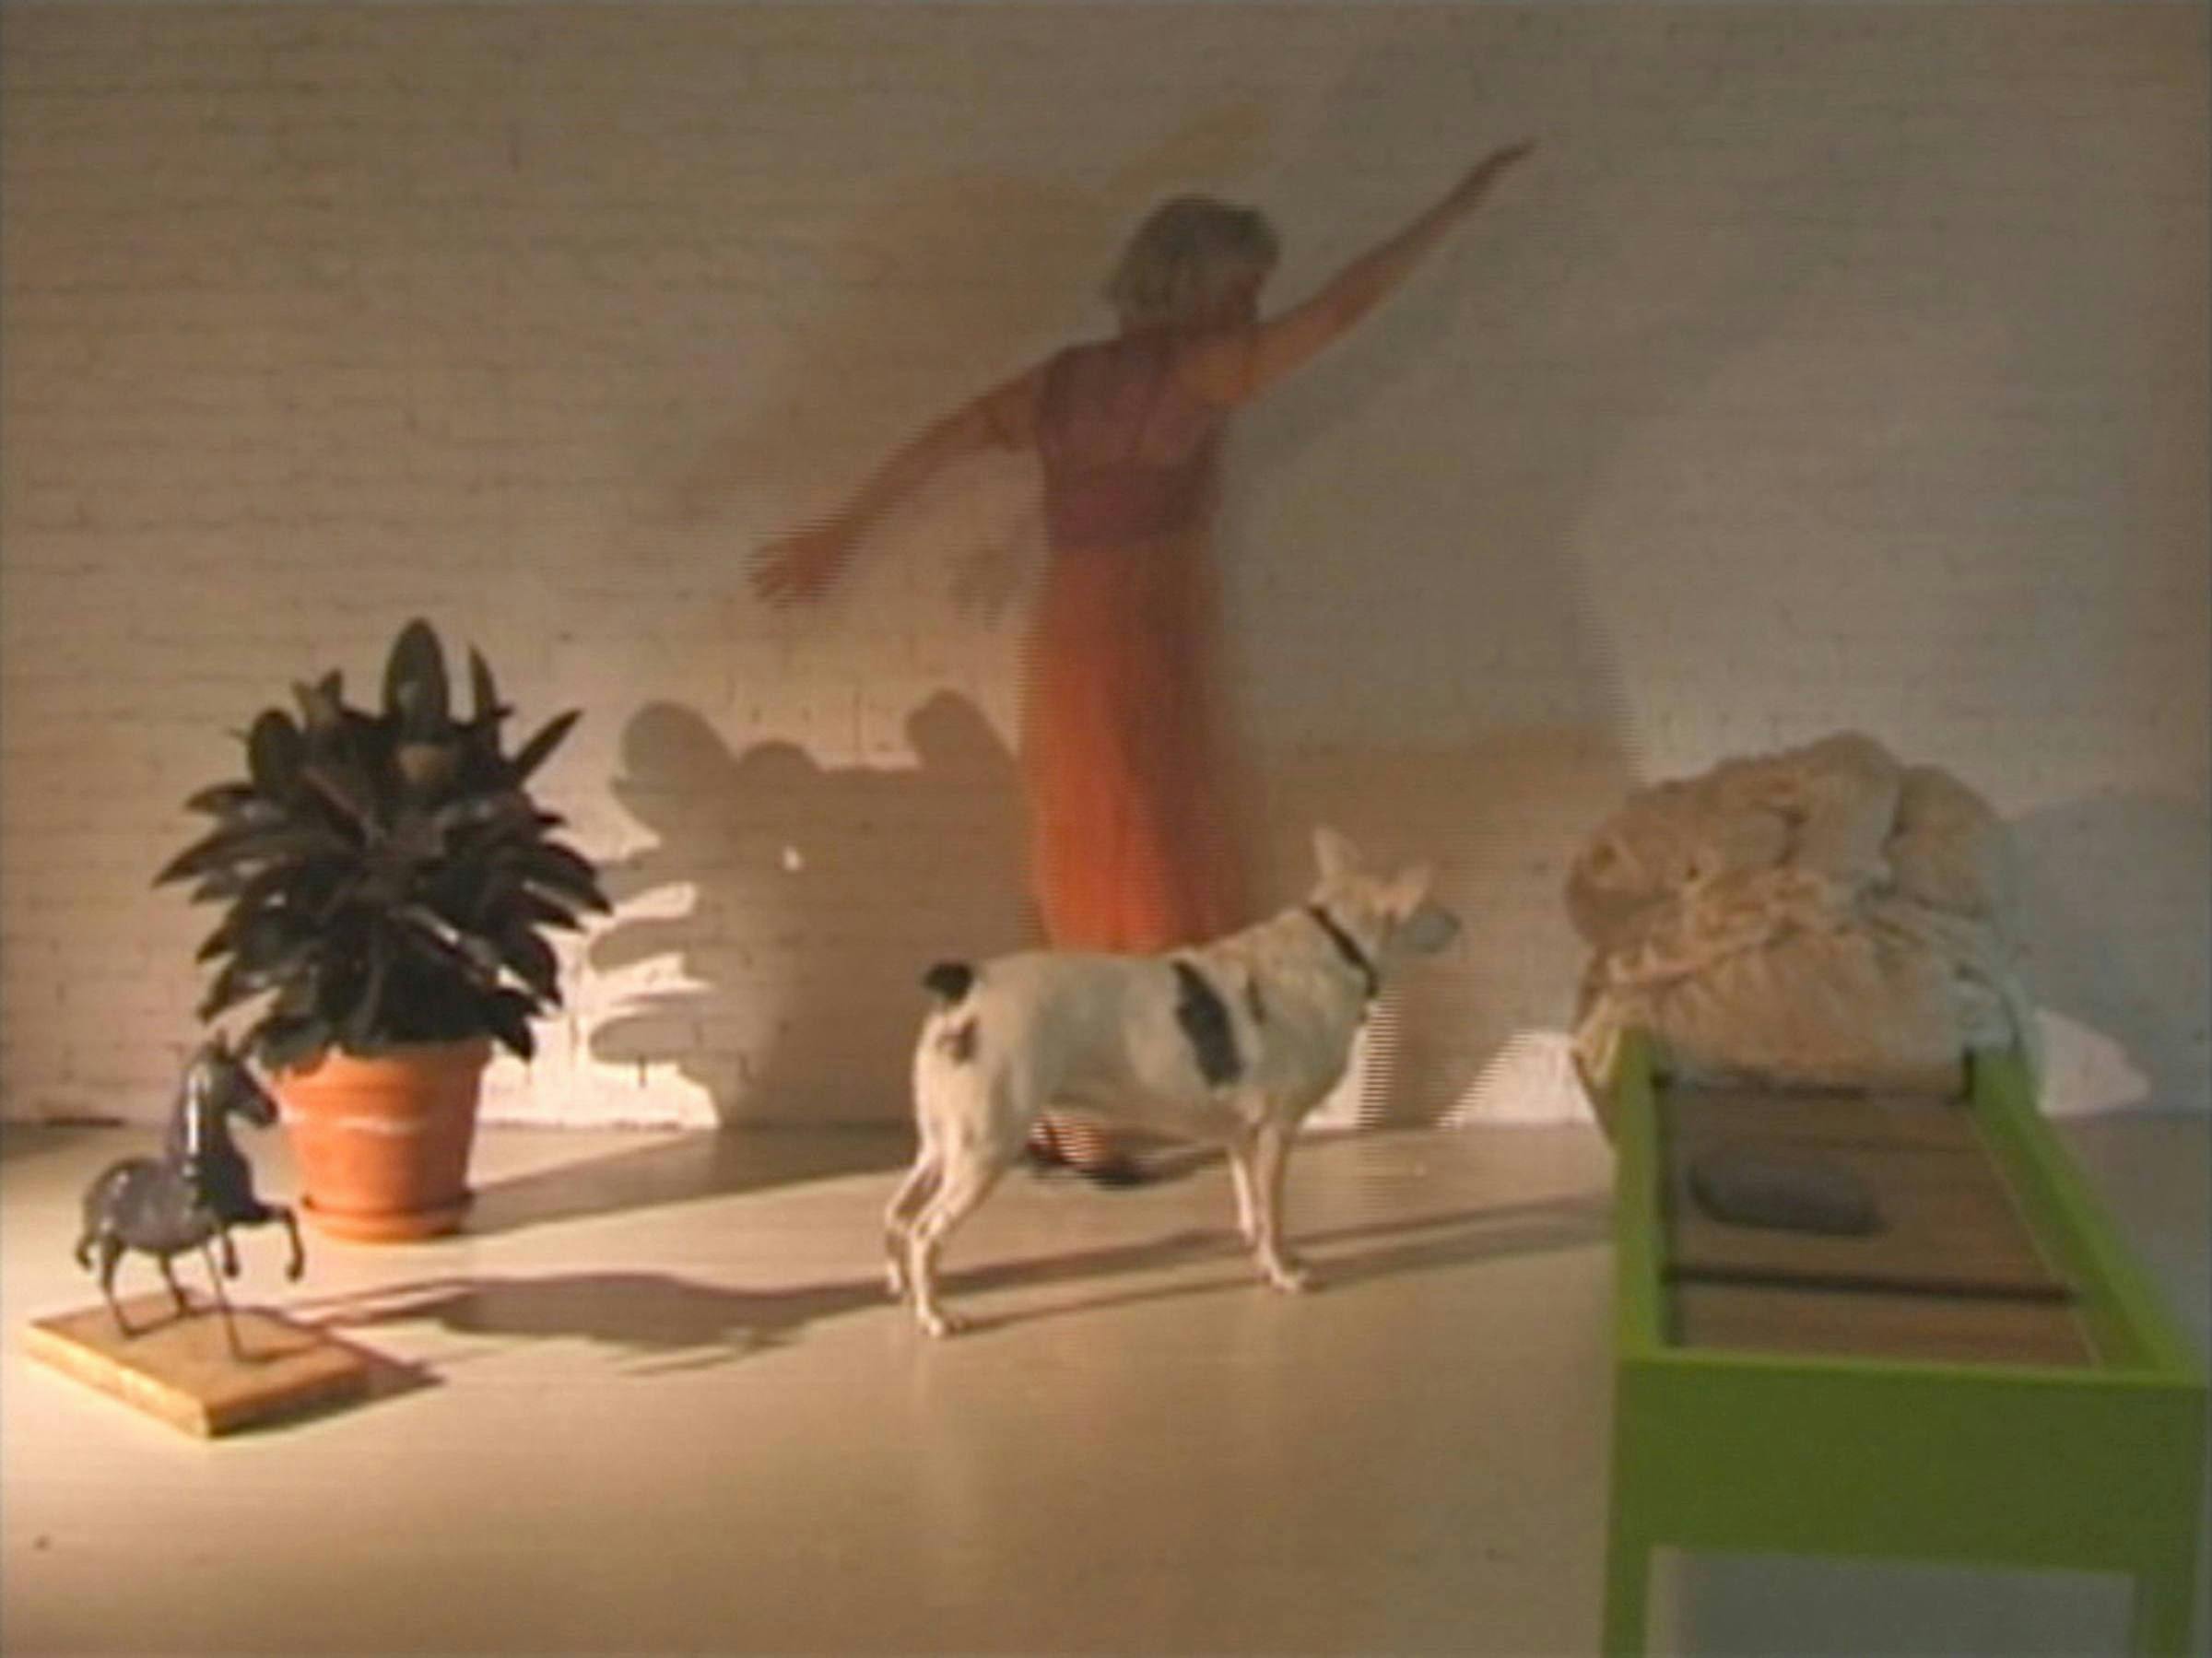 the artist is dancing in a white room. She is wearing an orange dress. There is a dog in front of her, a plant behind her and a green bed to her right. We can also see a statue of a horse in the foreground